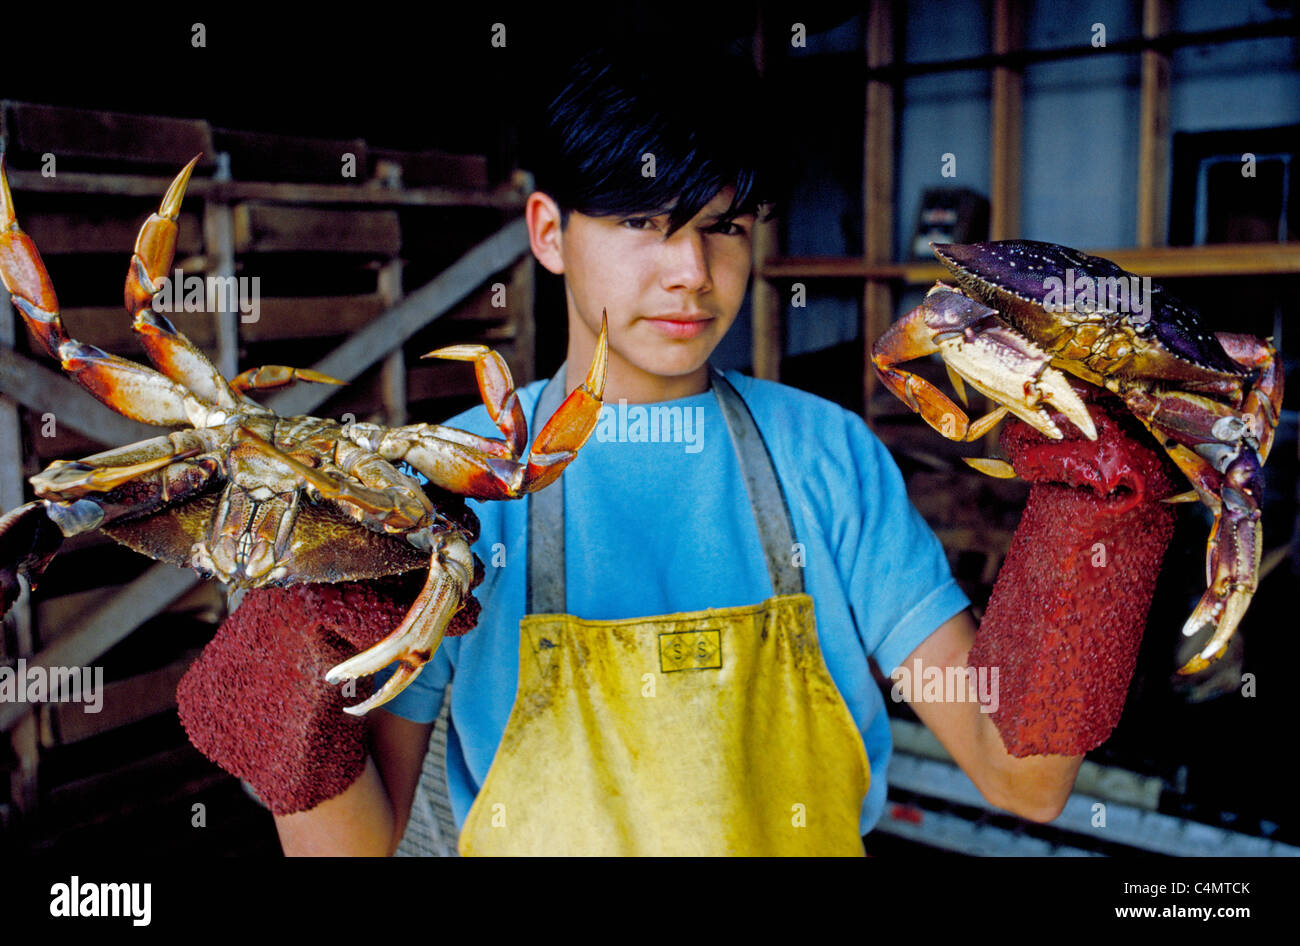 Two huge Dungeness crabs fresh off a crab boat are held by a young worker wearing protective gloves in a seafood processing plant in Alaska, USA. Stock Photo